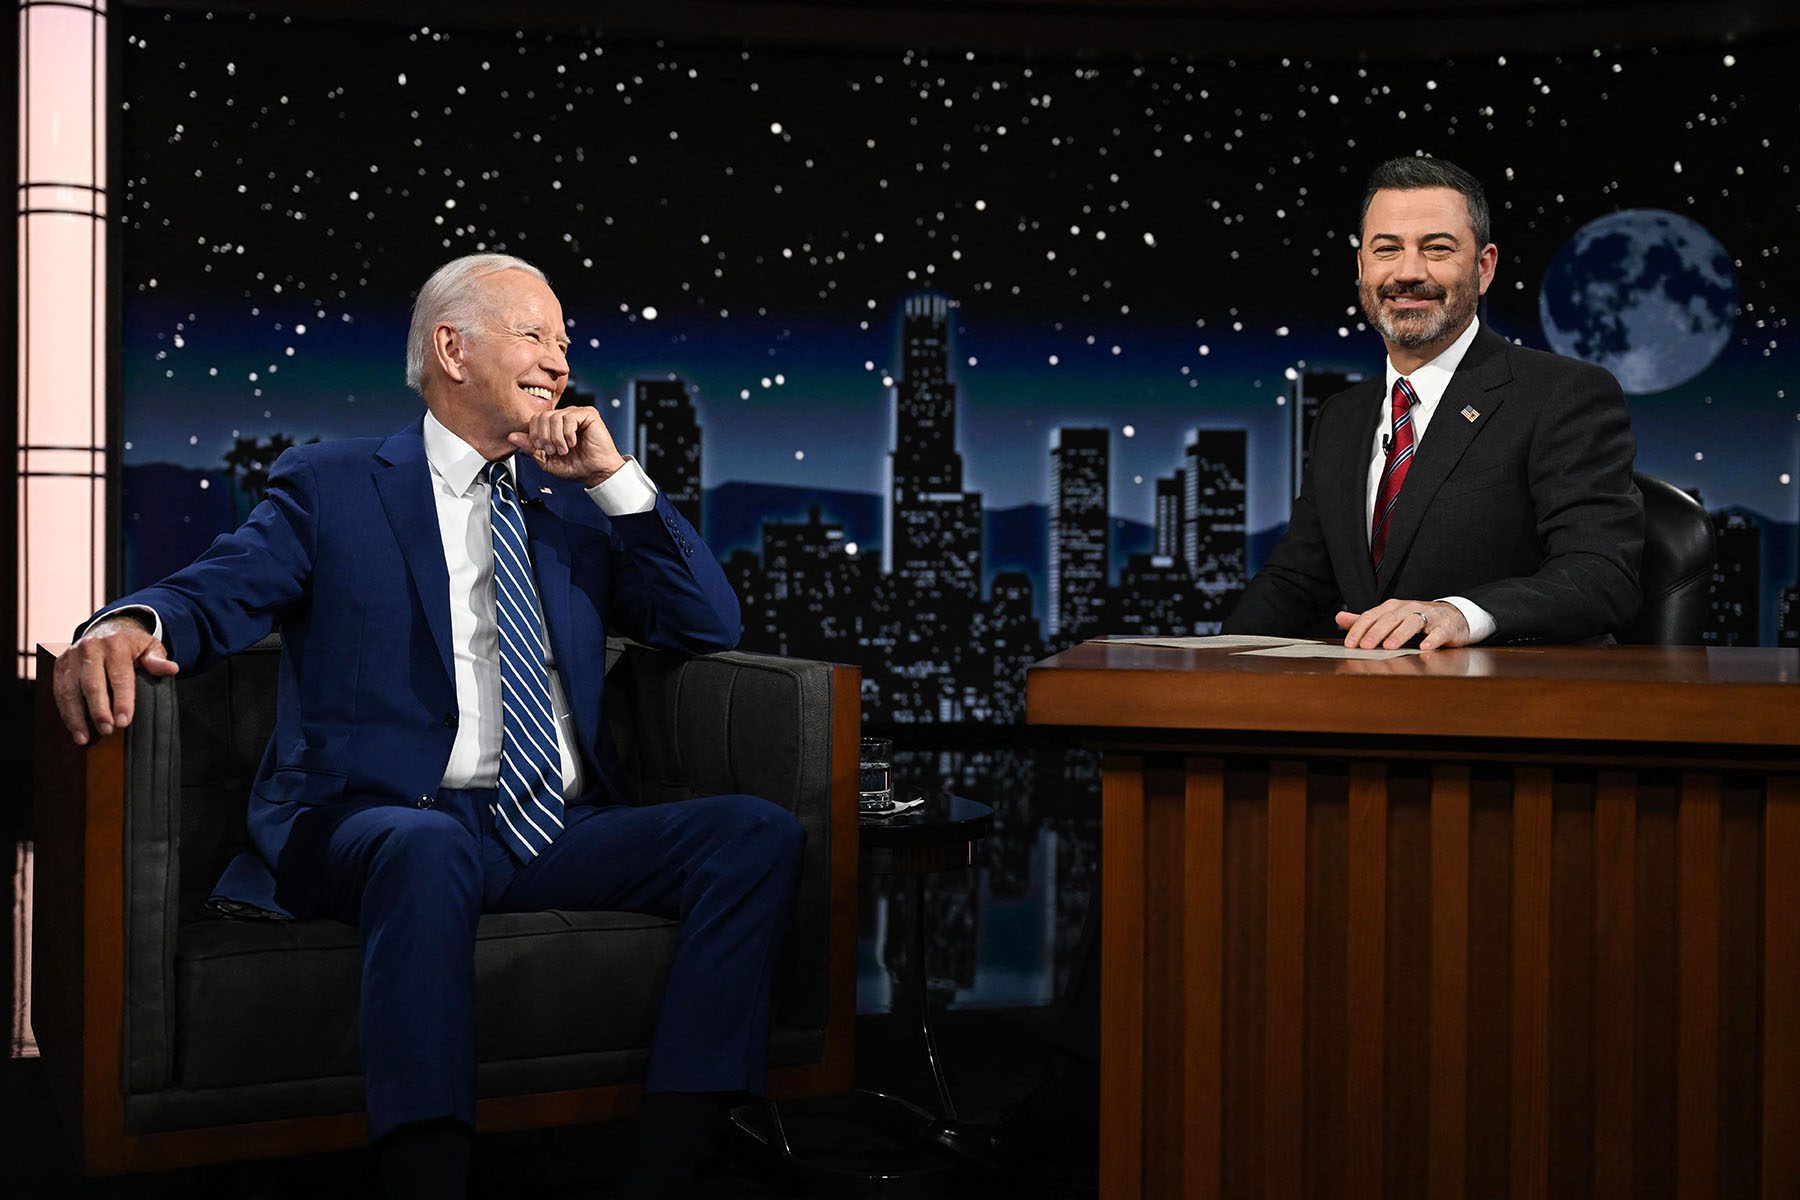 President Biden sits next to Jimmy Kimmel as he makes his first in-person appearance on "Jimmy Kimmel Live!"